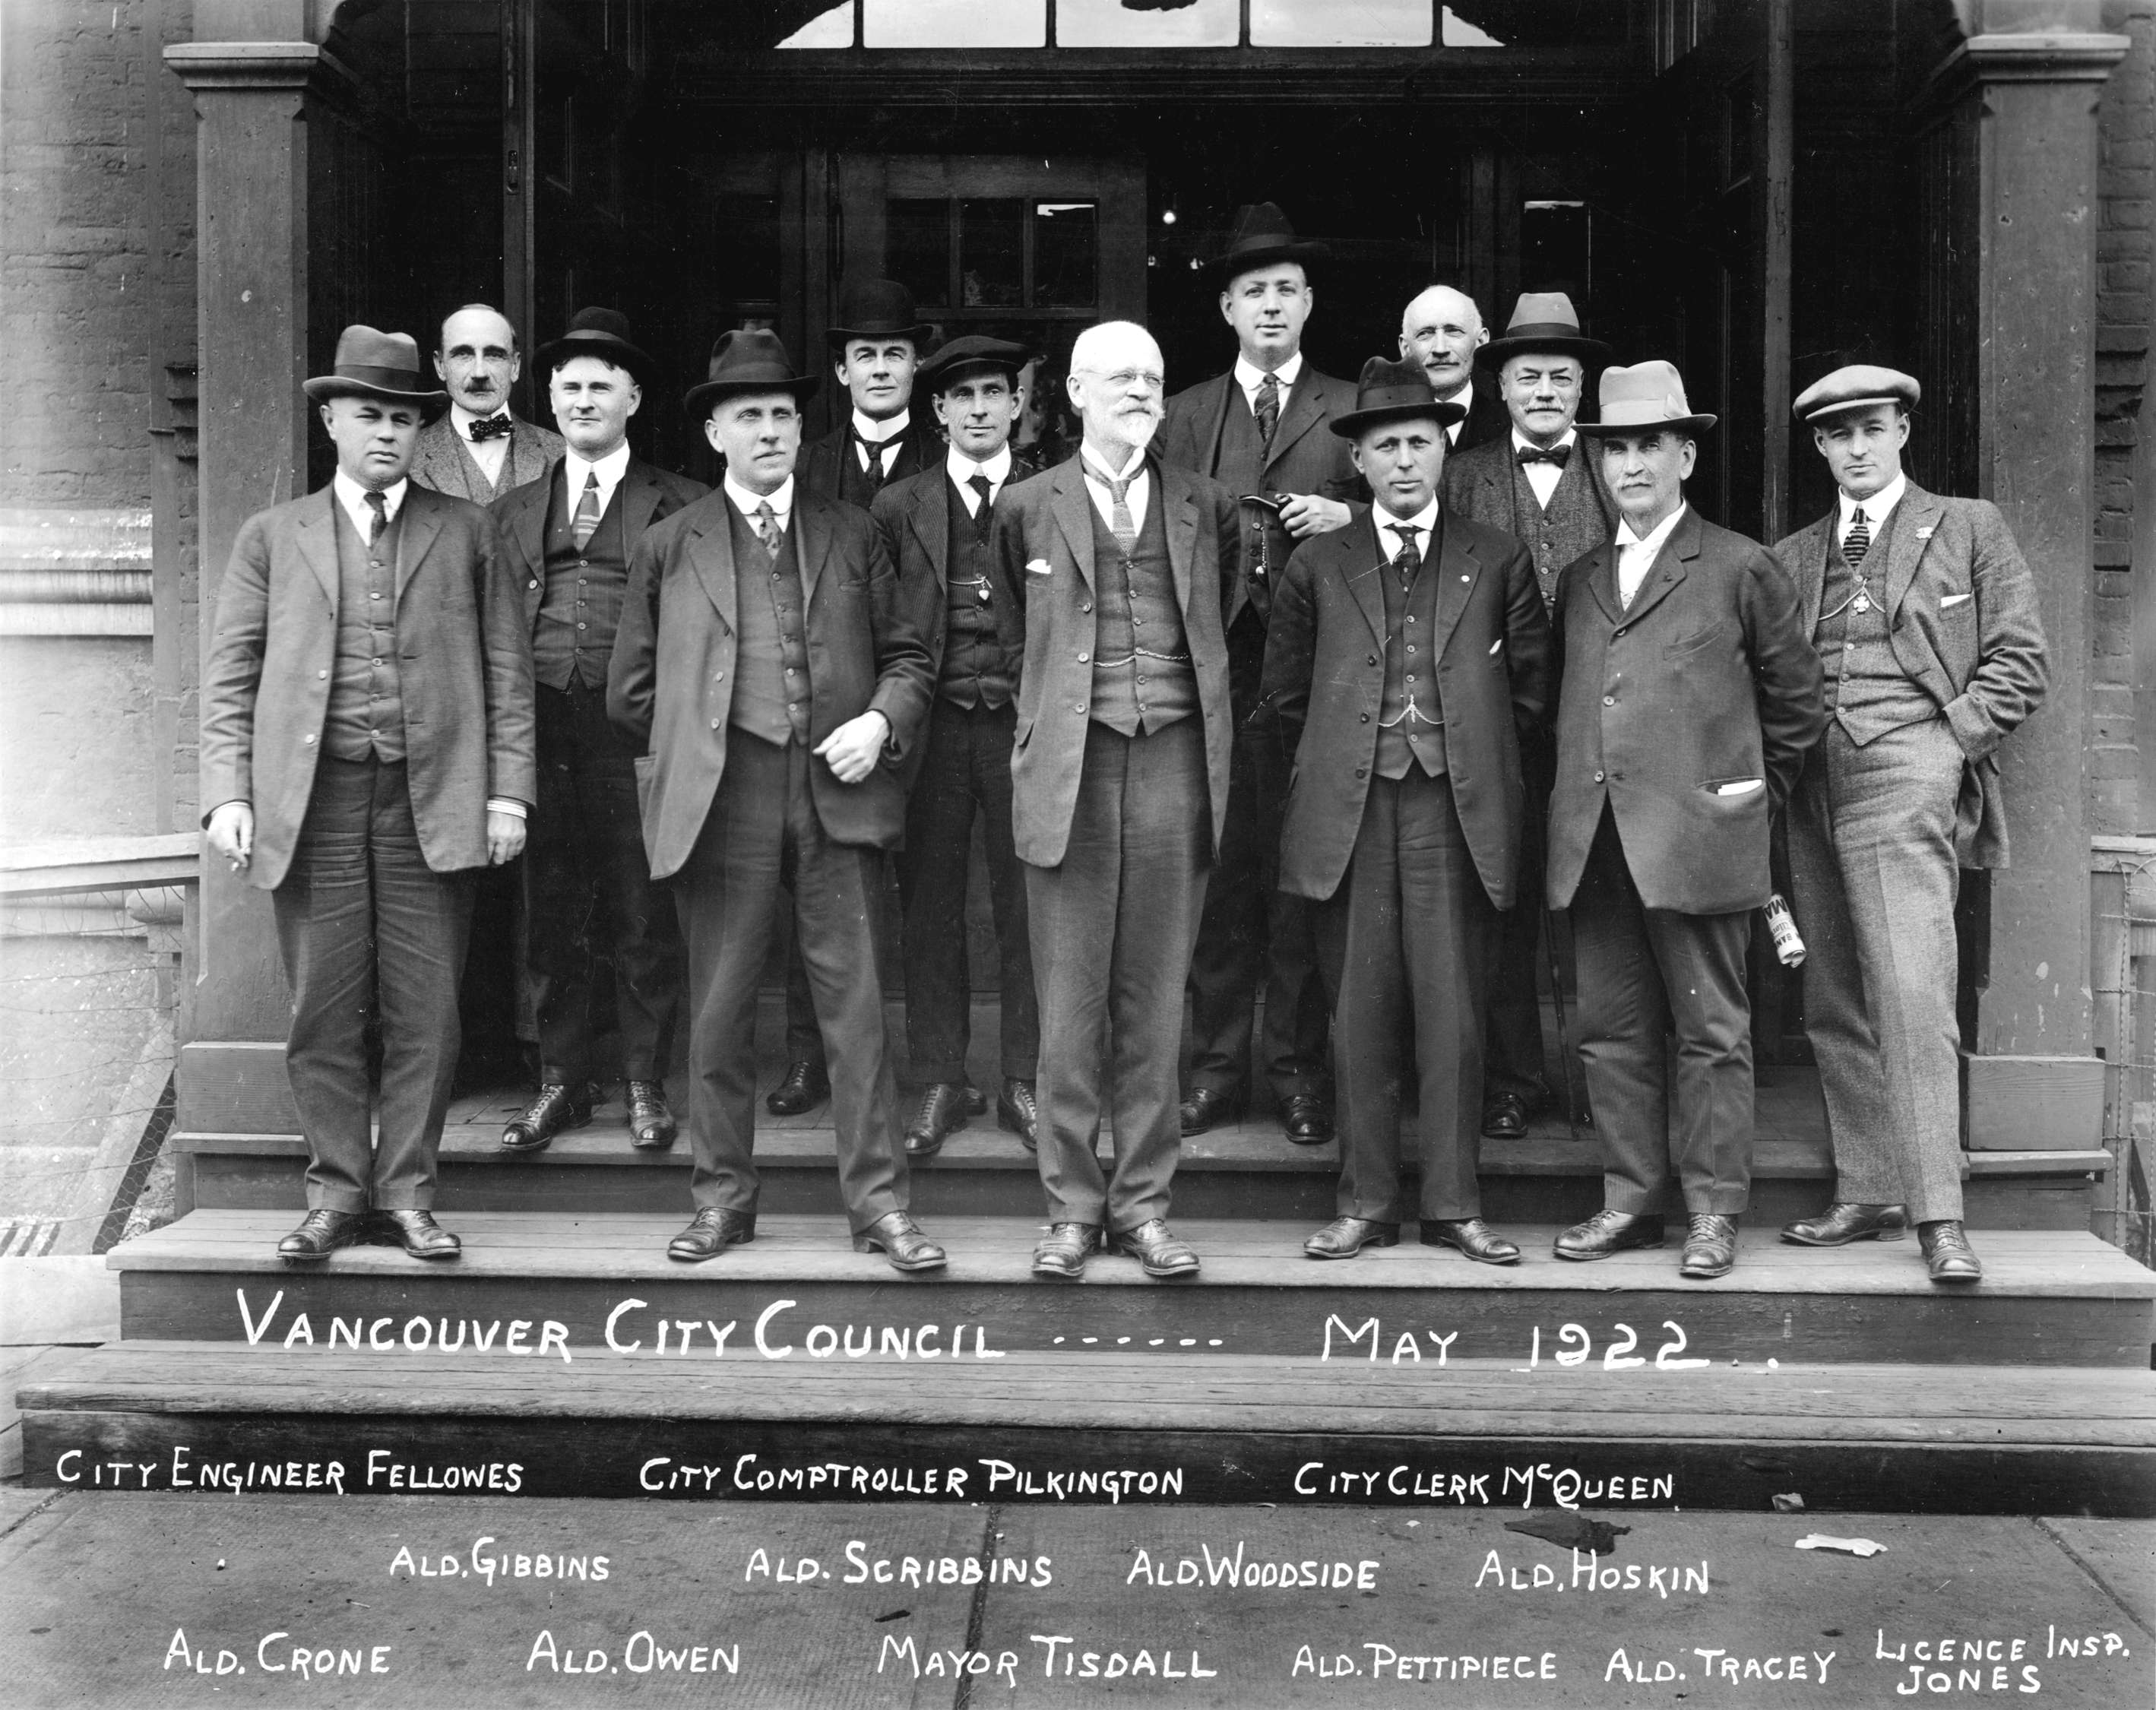 http://upload.wikimedia.org/wikipedia/commons/8/80/Vancouver_City_Council_1922.jpg